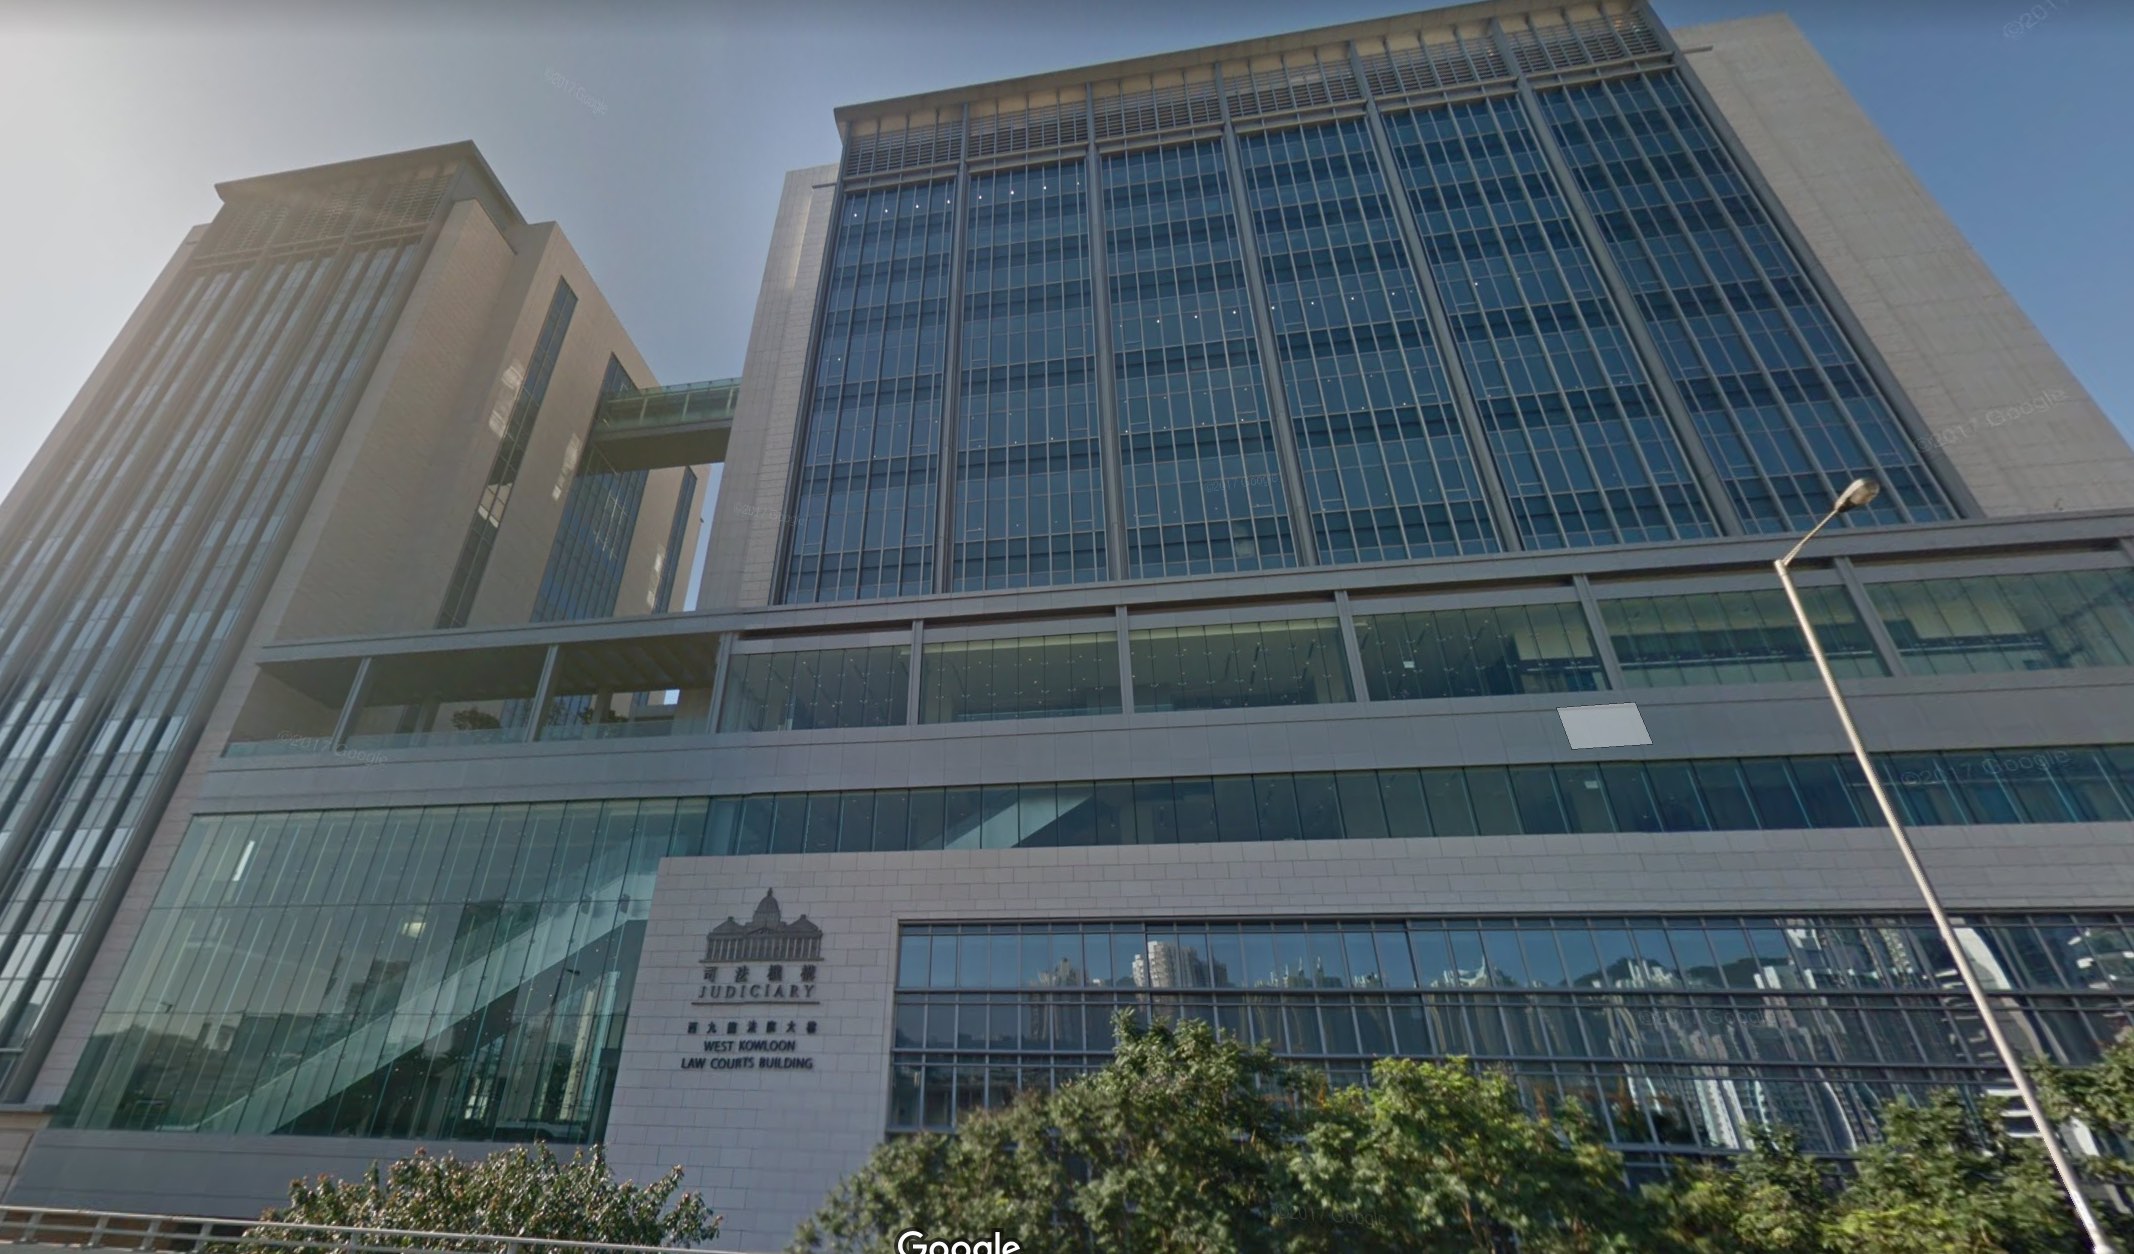 The West Kowloon Law Courts. Photo via Google Maps.